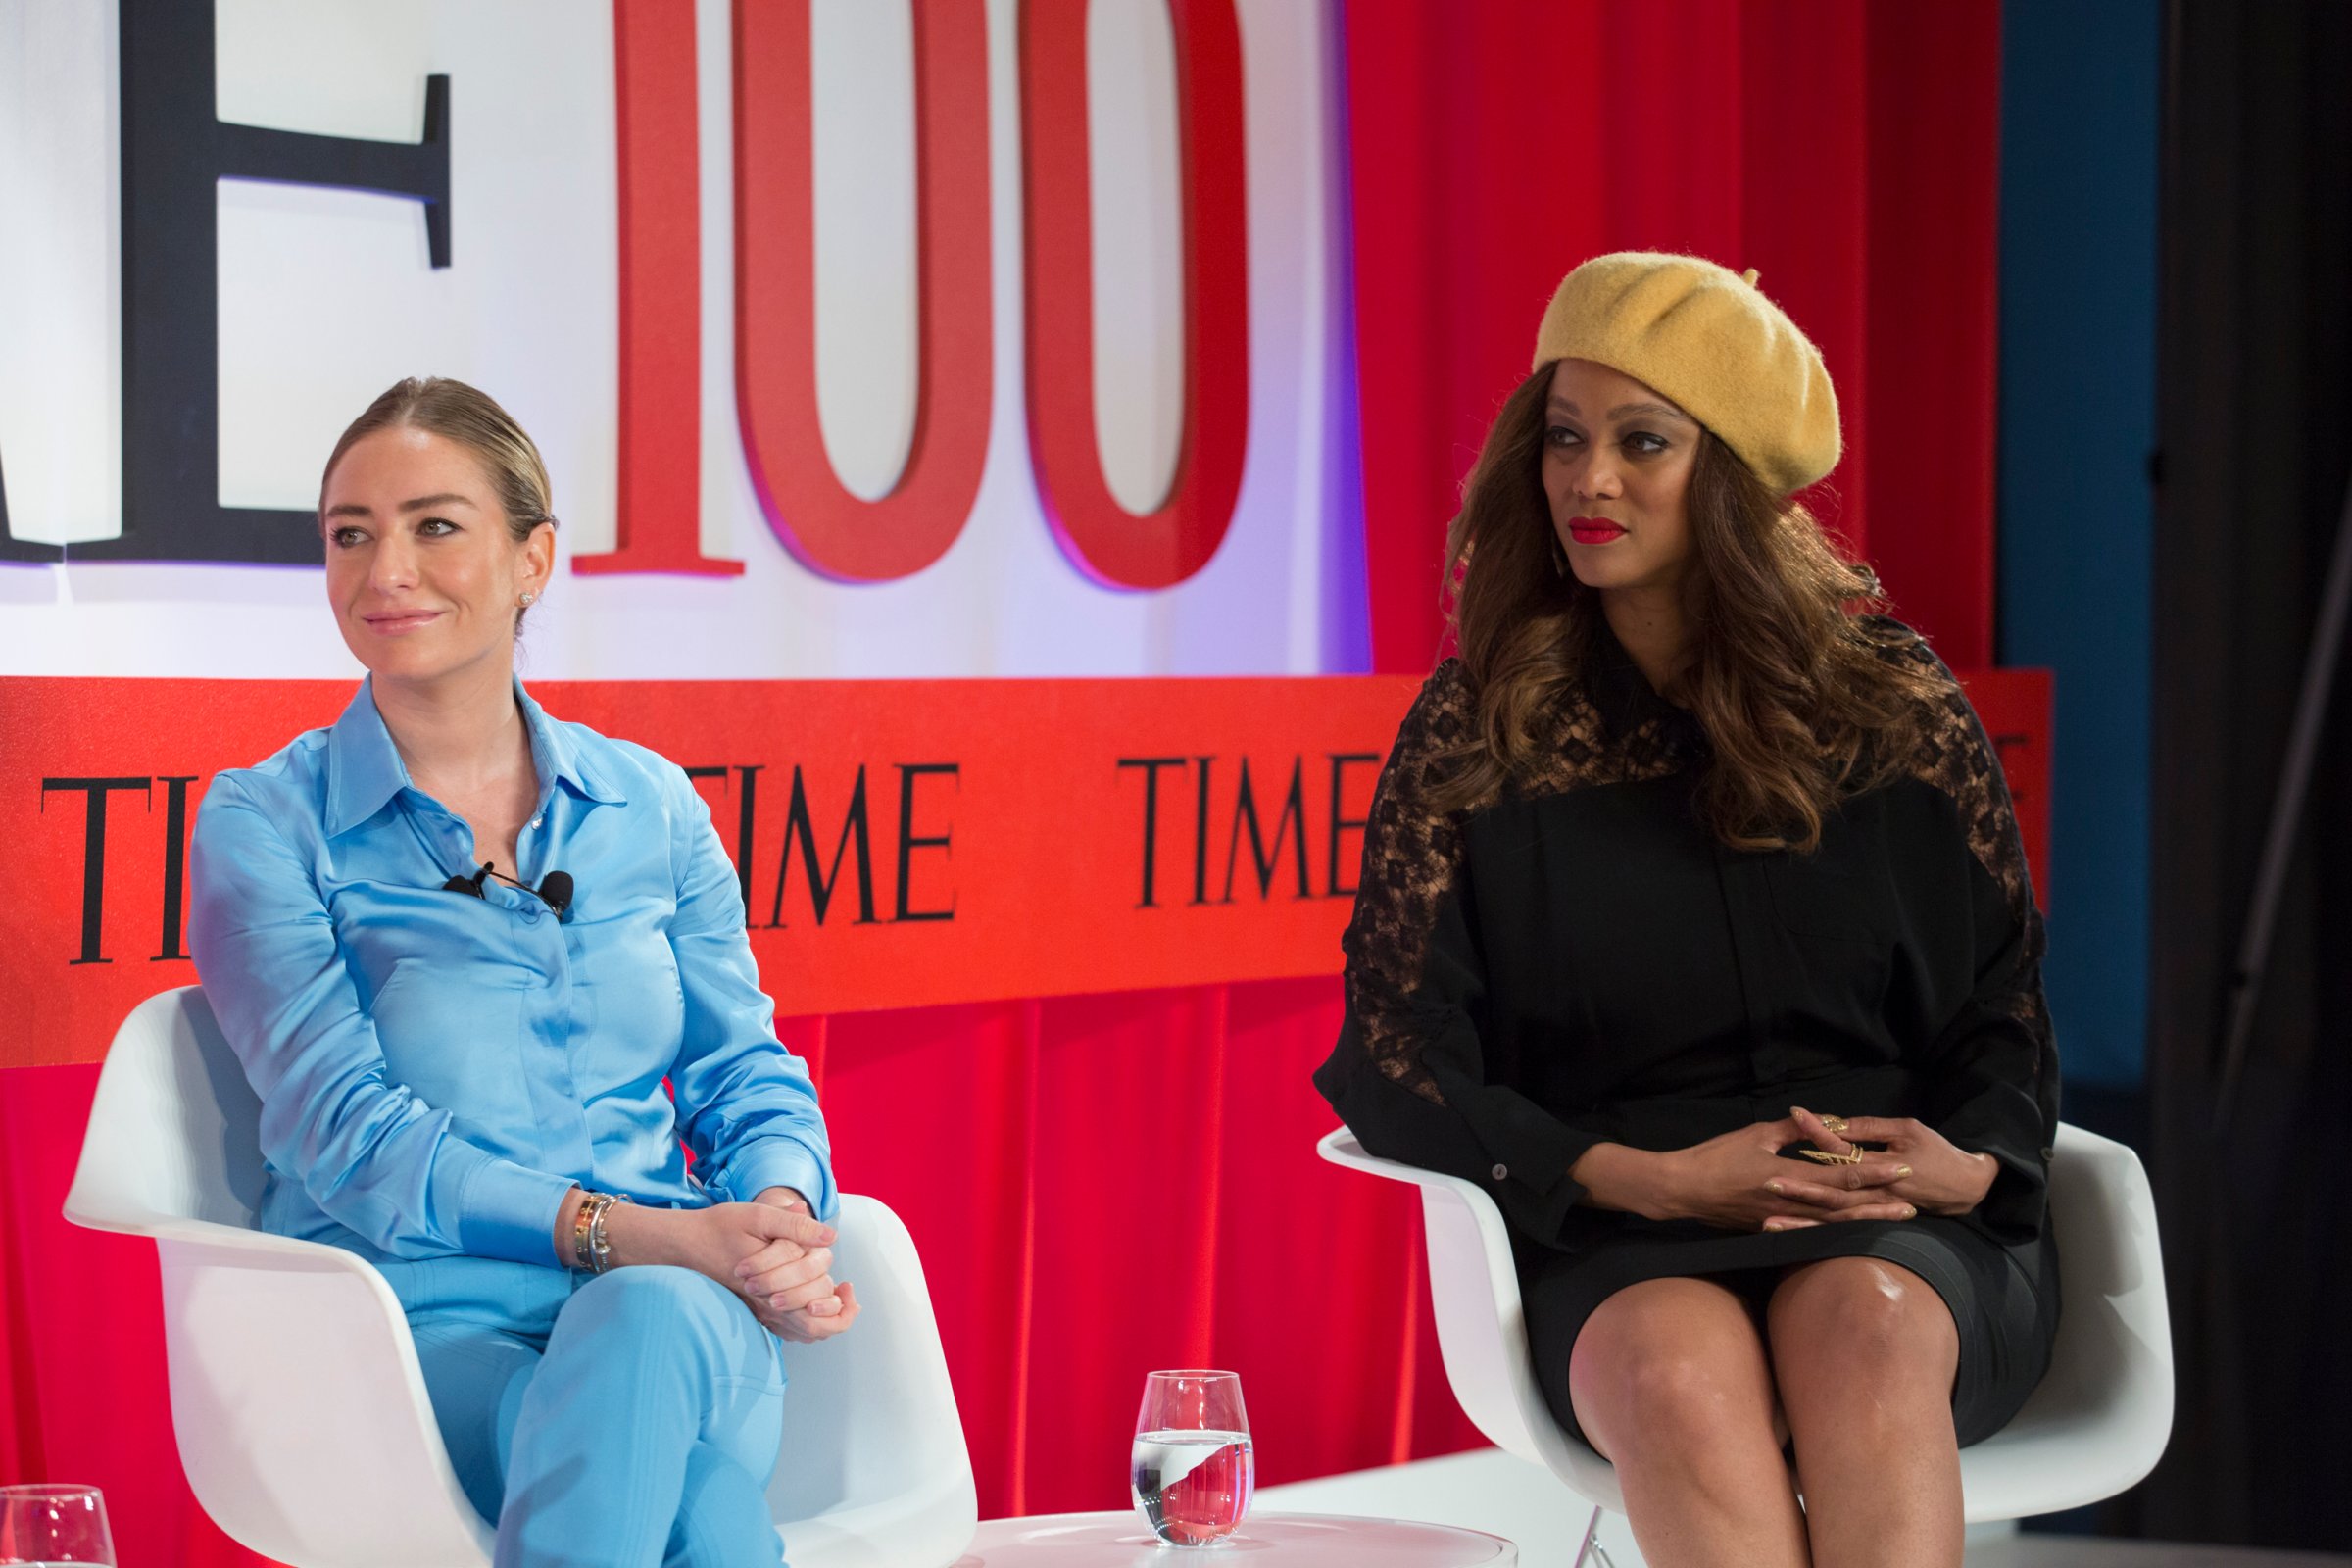 (L-R) Whitney Wolfe Herd and Tyra Banks participate in a panel on Empowering Women in Business at the TIME100 Summit in New York, on April 23, 2019.